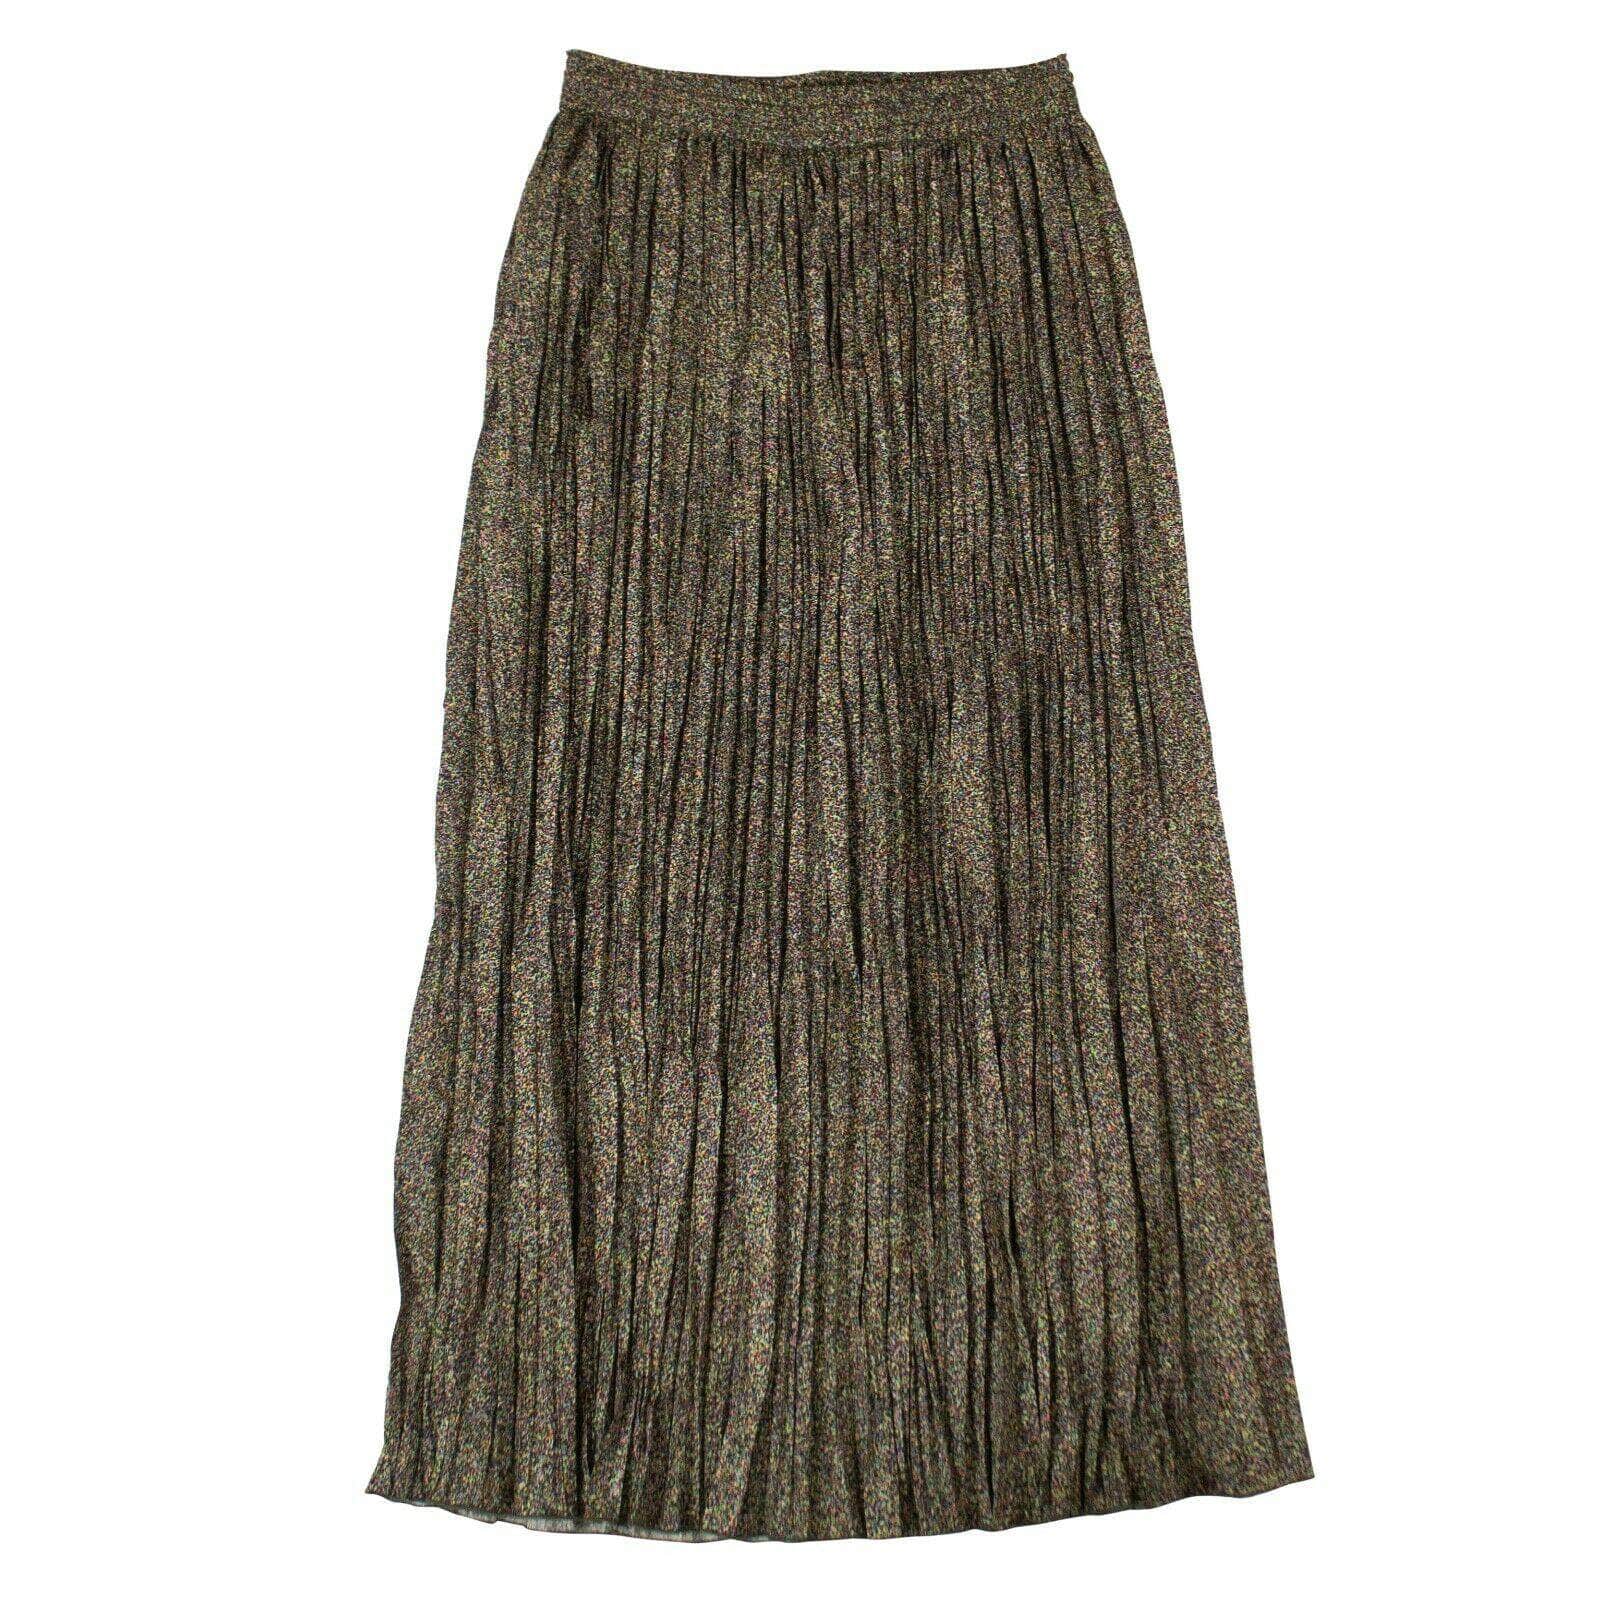 A_Plan_Application a_plan_application, channelenable-all, chicmi, couponcollection, gender-womens, july4th, main-clothing, size-s, under-250, womens-pleated-skirts S Multicolored Pleated Midi Skirt 82NGG-AP-4/S 82NGG-AP-4/S